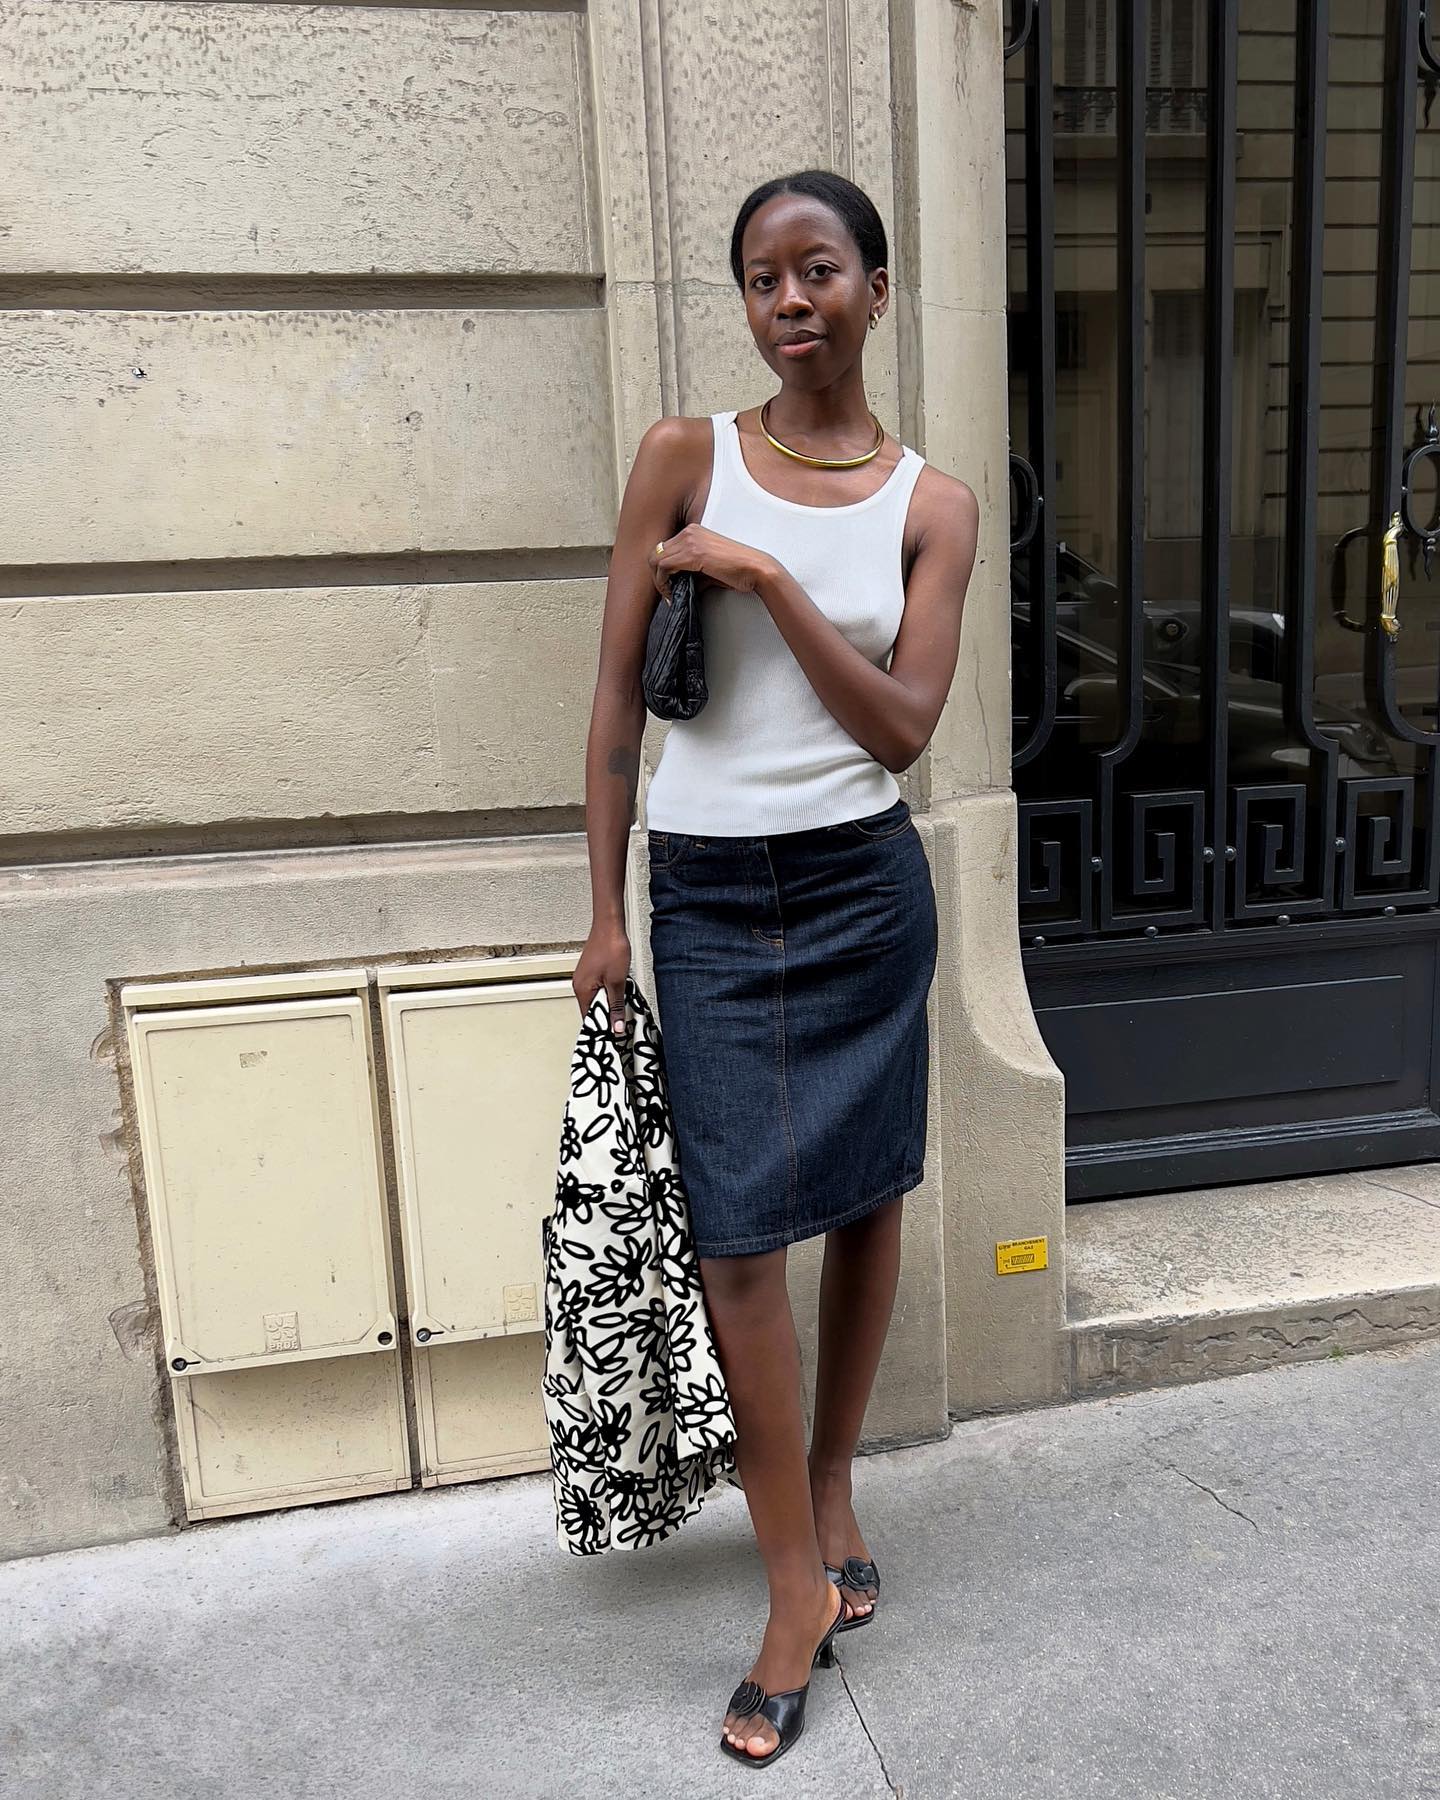 Influencer Sylvie Mus poses on a sidewalk in Paris wearing a collar necklace, white knit tank top, black clutch bag, knee-length denim skirt, and black mule sandals.